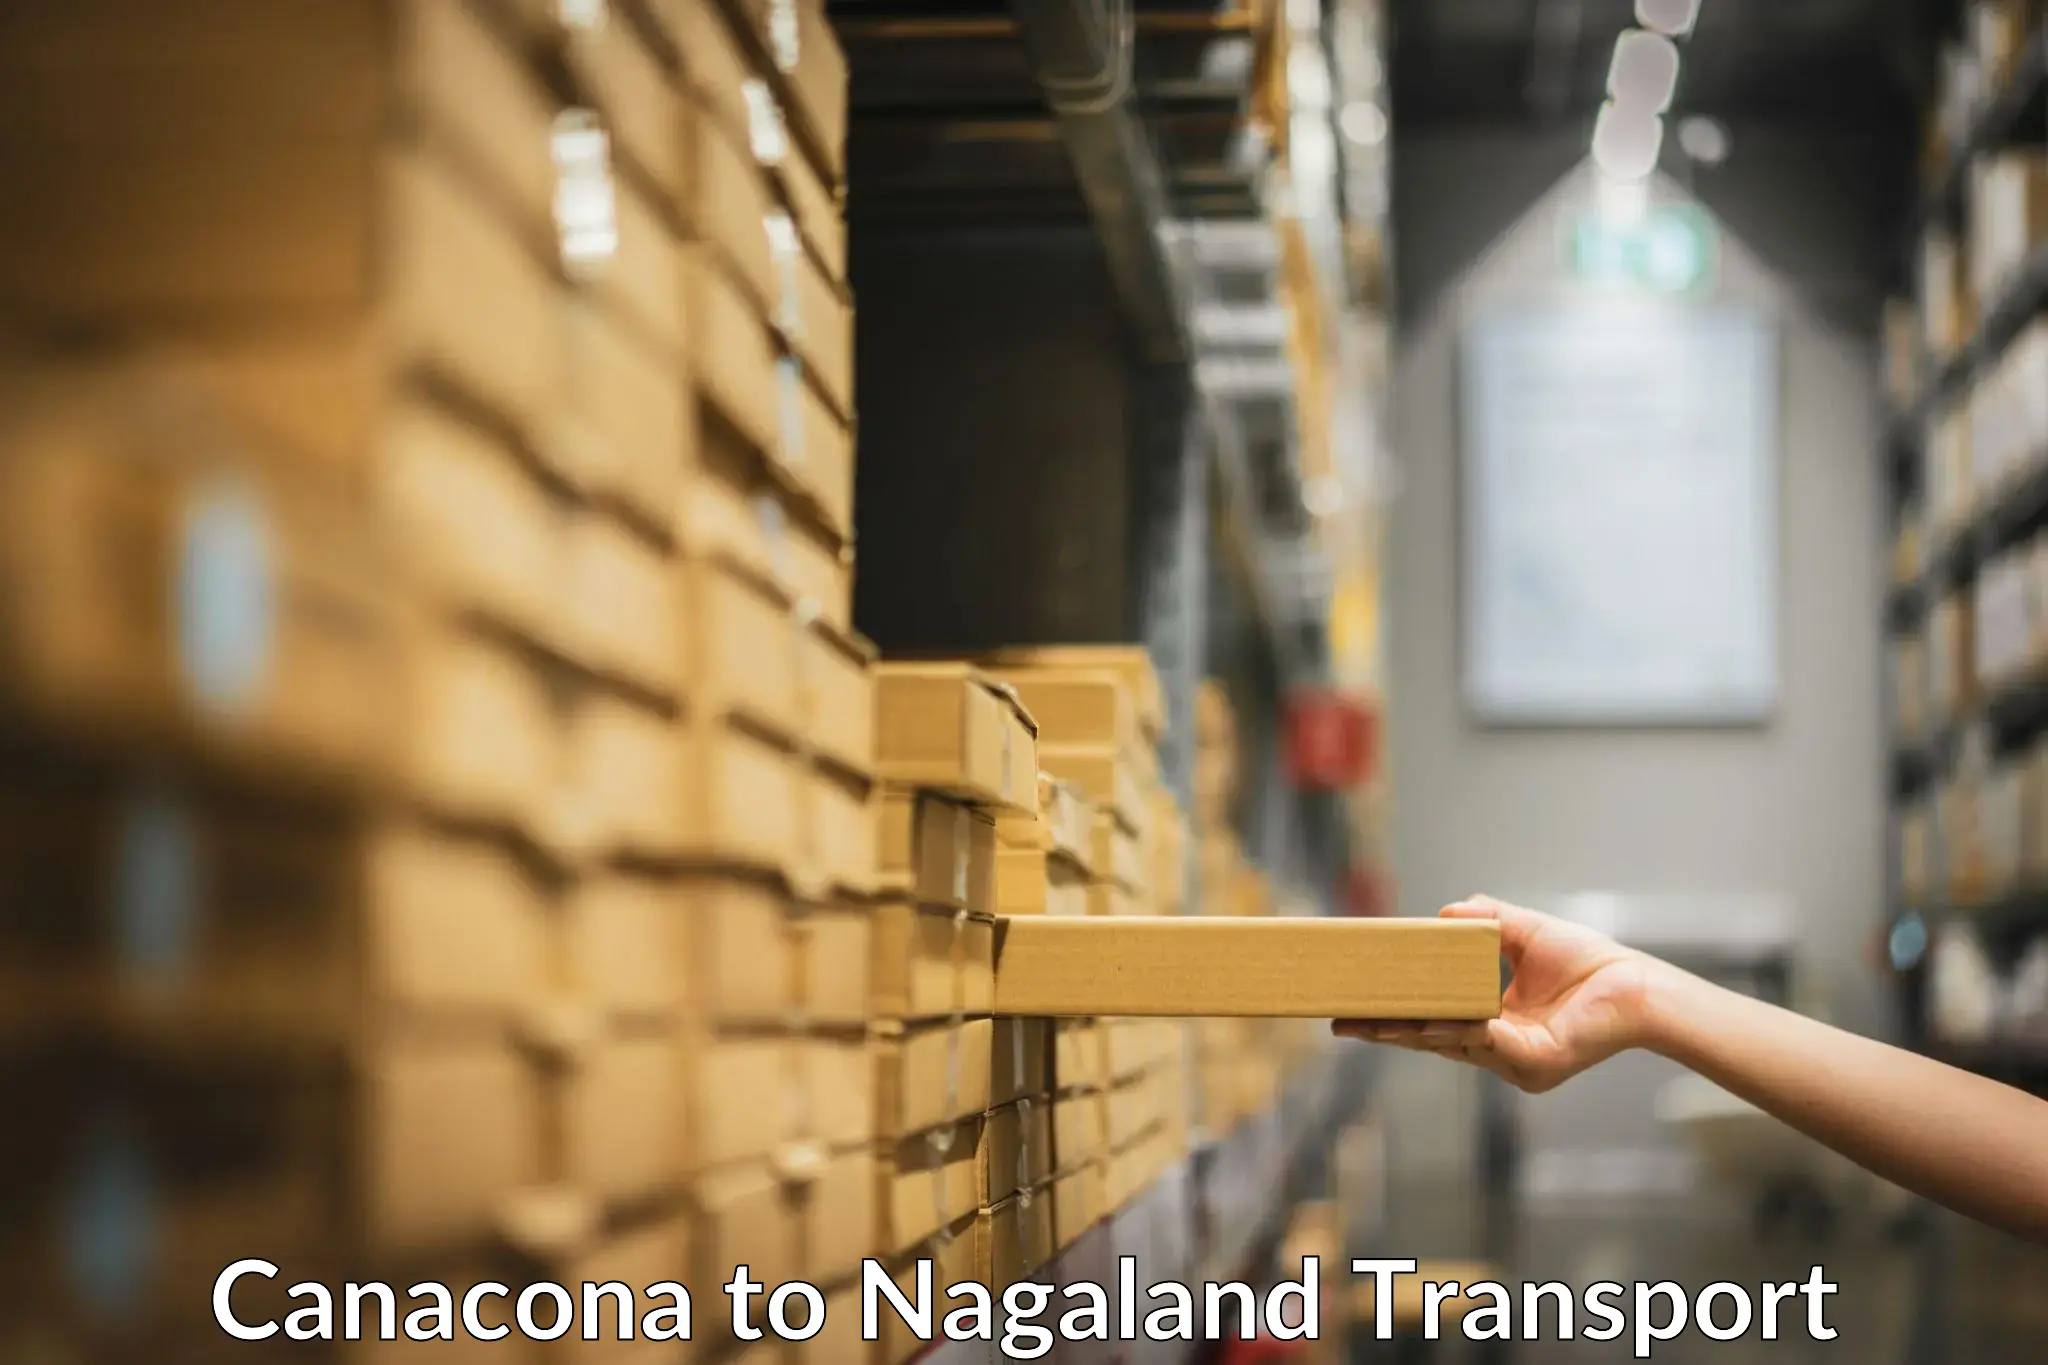 Container transport service Canacona to NIT Nagaland